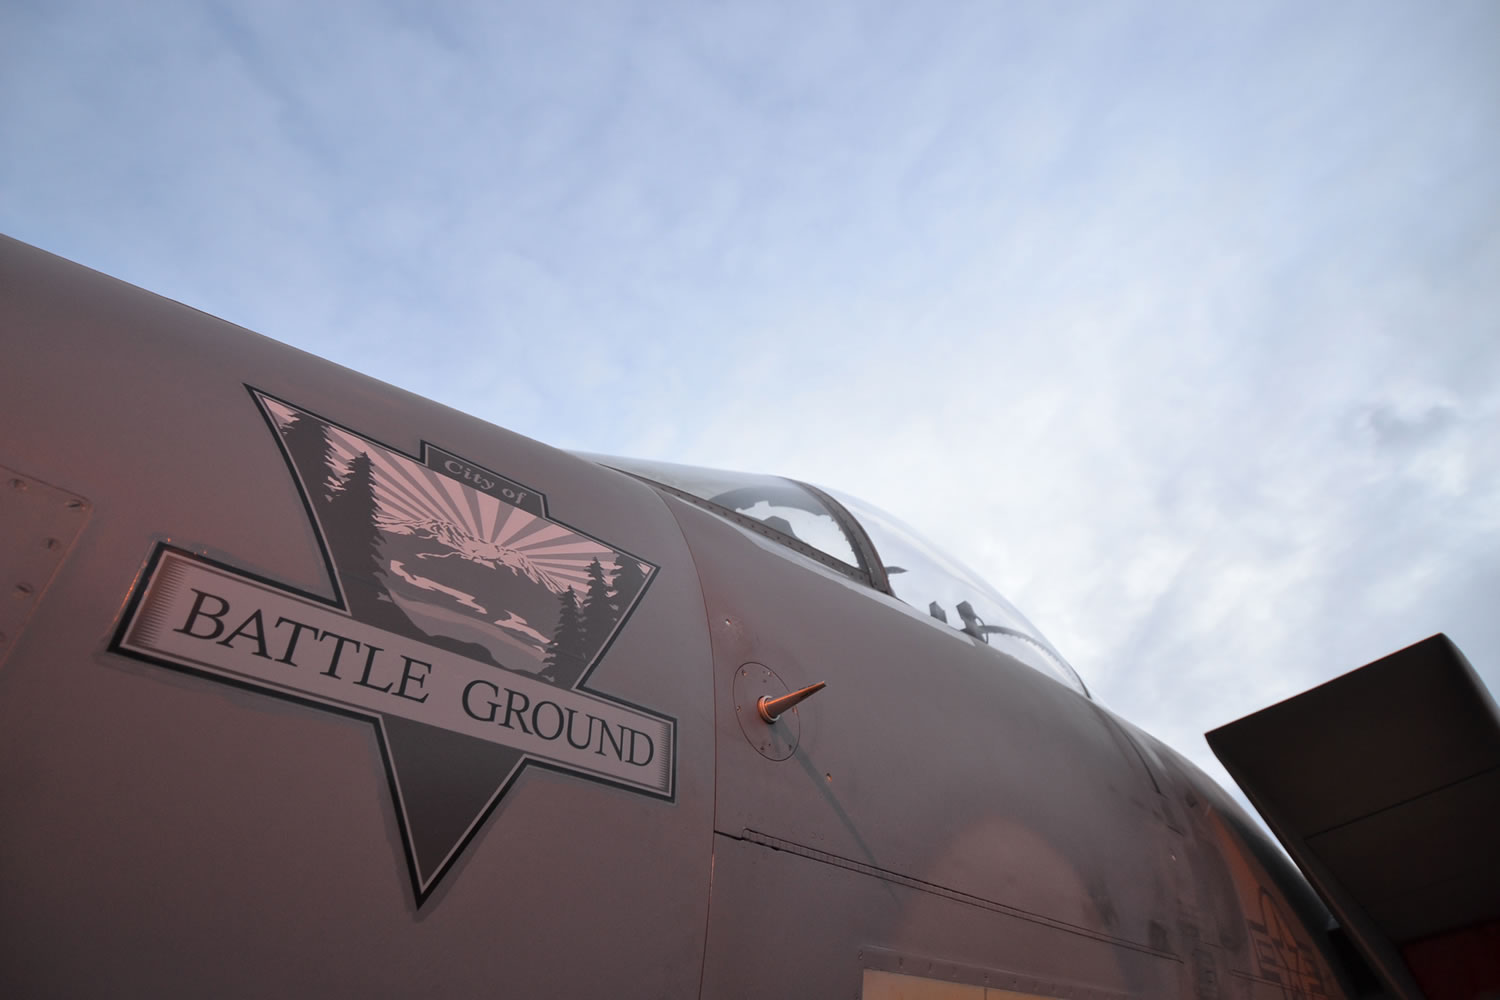 The Oregon Air National Guard unveiled a Battle Ground emblem on one of its F-15 Eagle jets during a ceremony Thursday morning in Portland.